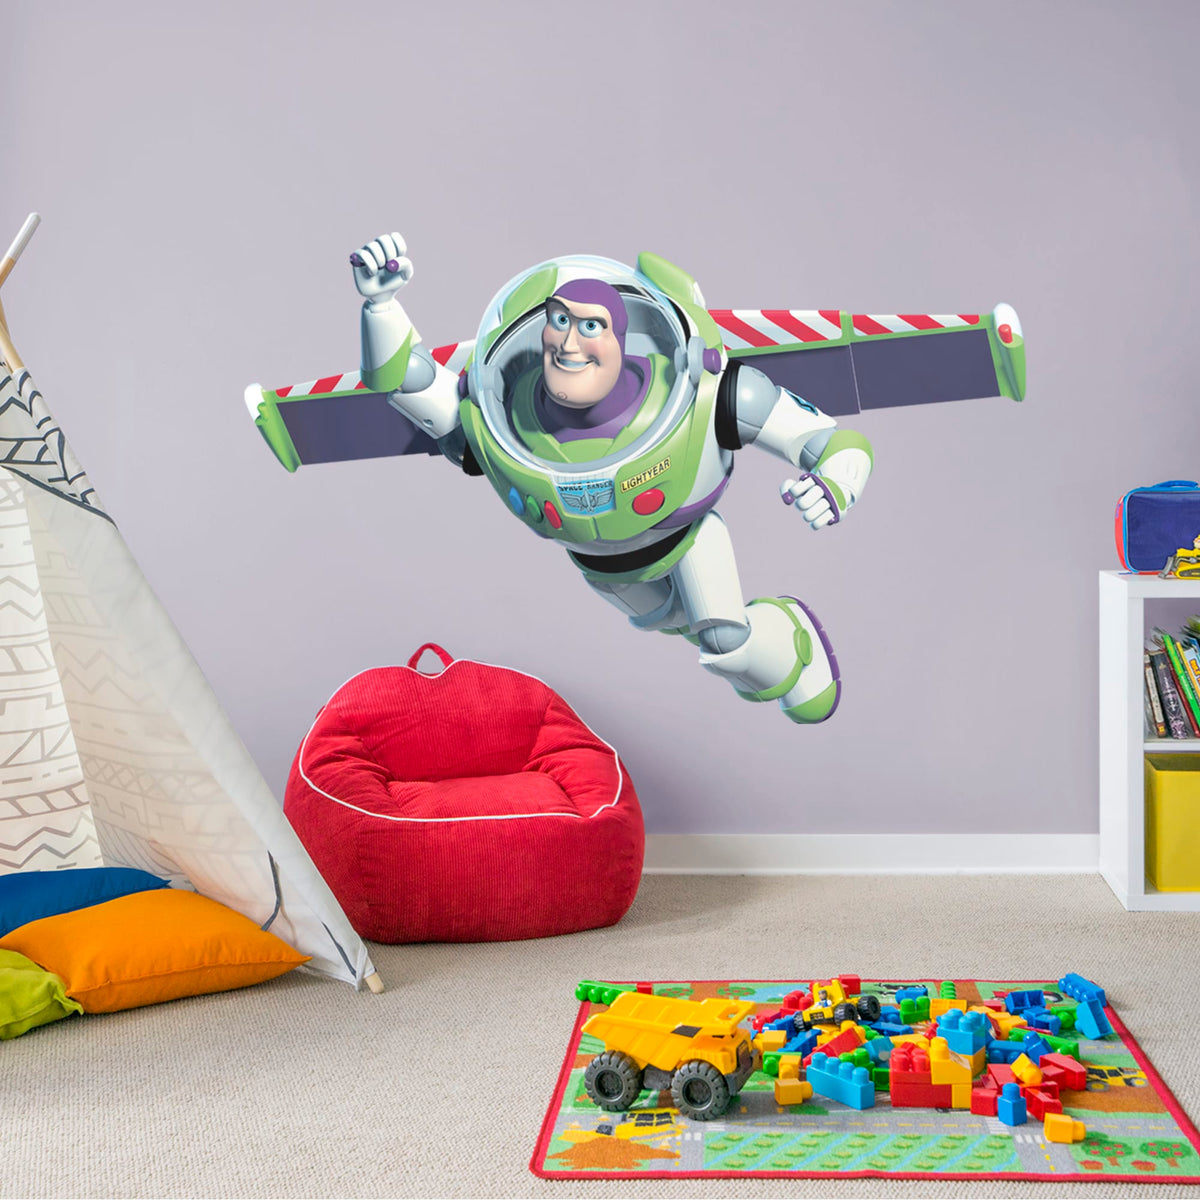 Buzz Lightyear - Officially Licensed 